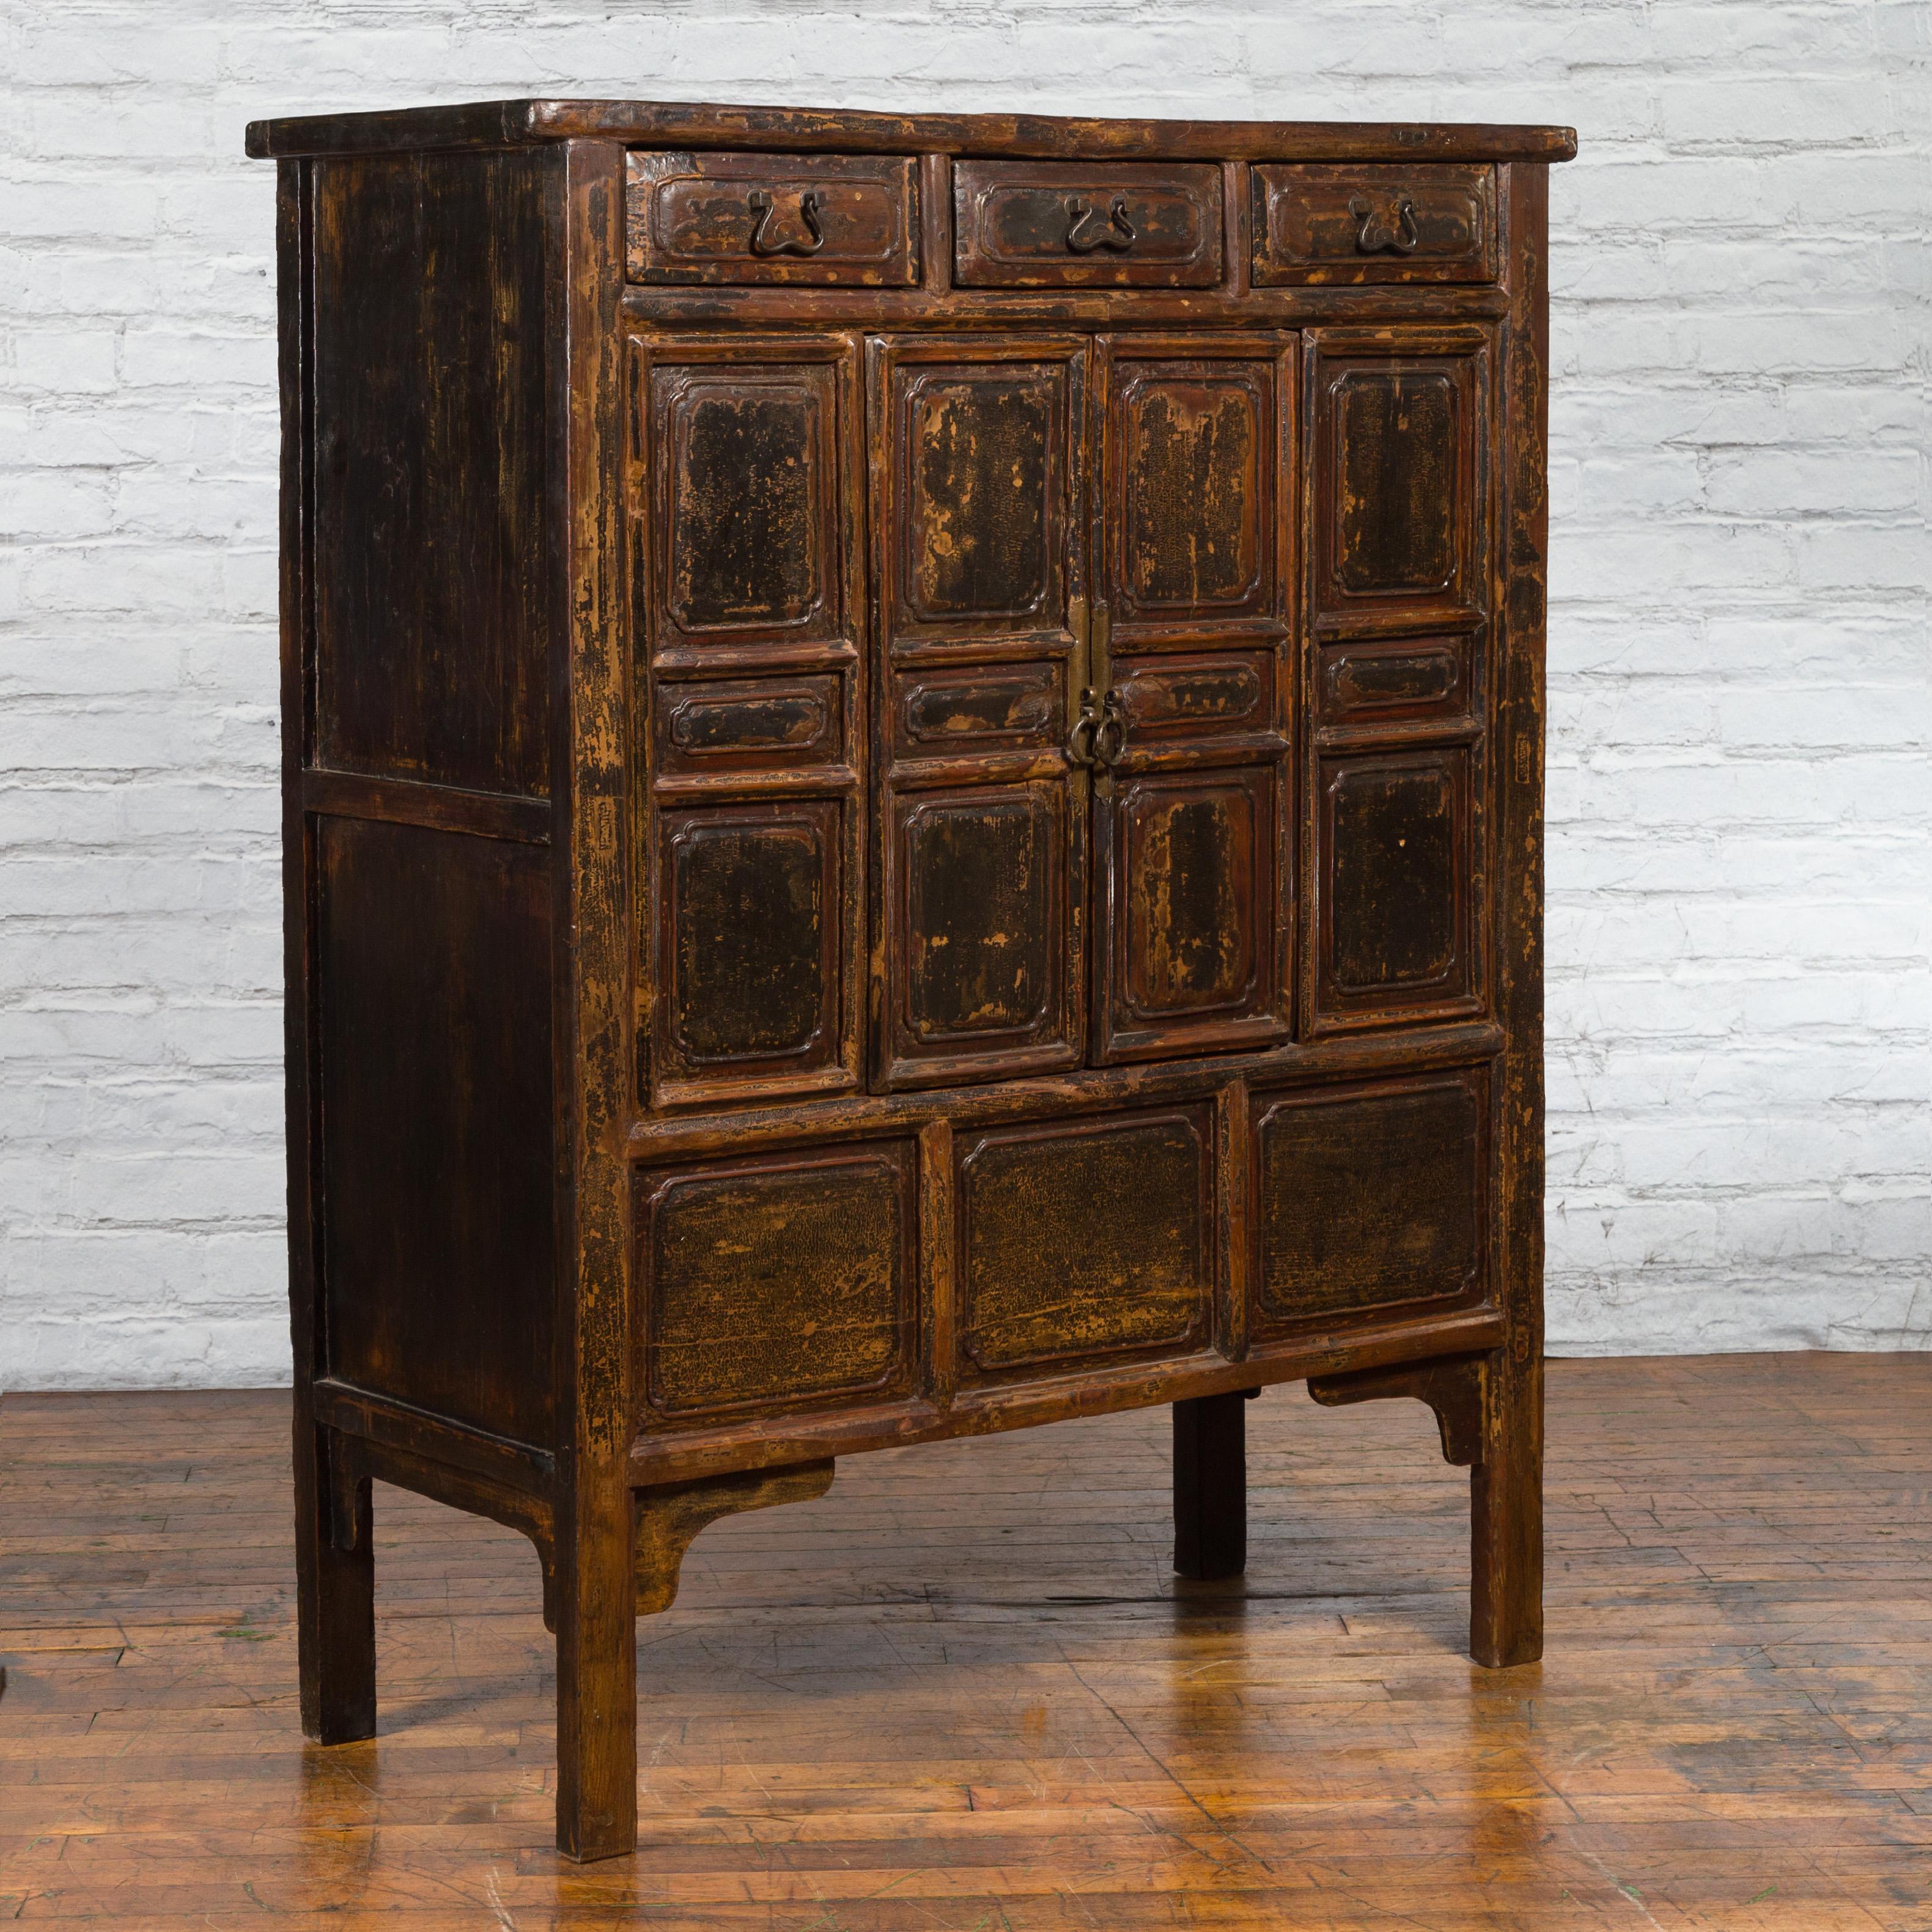 Carved Qing Dynasty 1800s Brown Lacquered Chinese Cabinet with Doors and Drawers For Sale